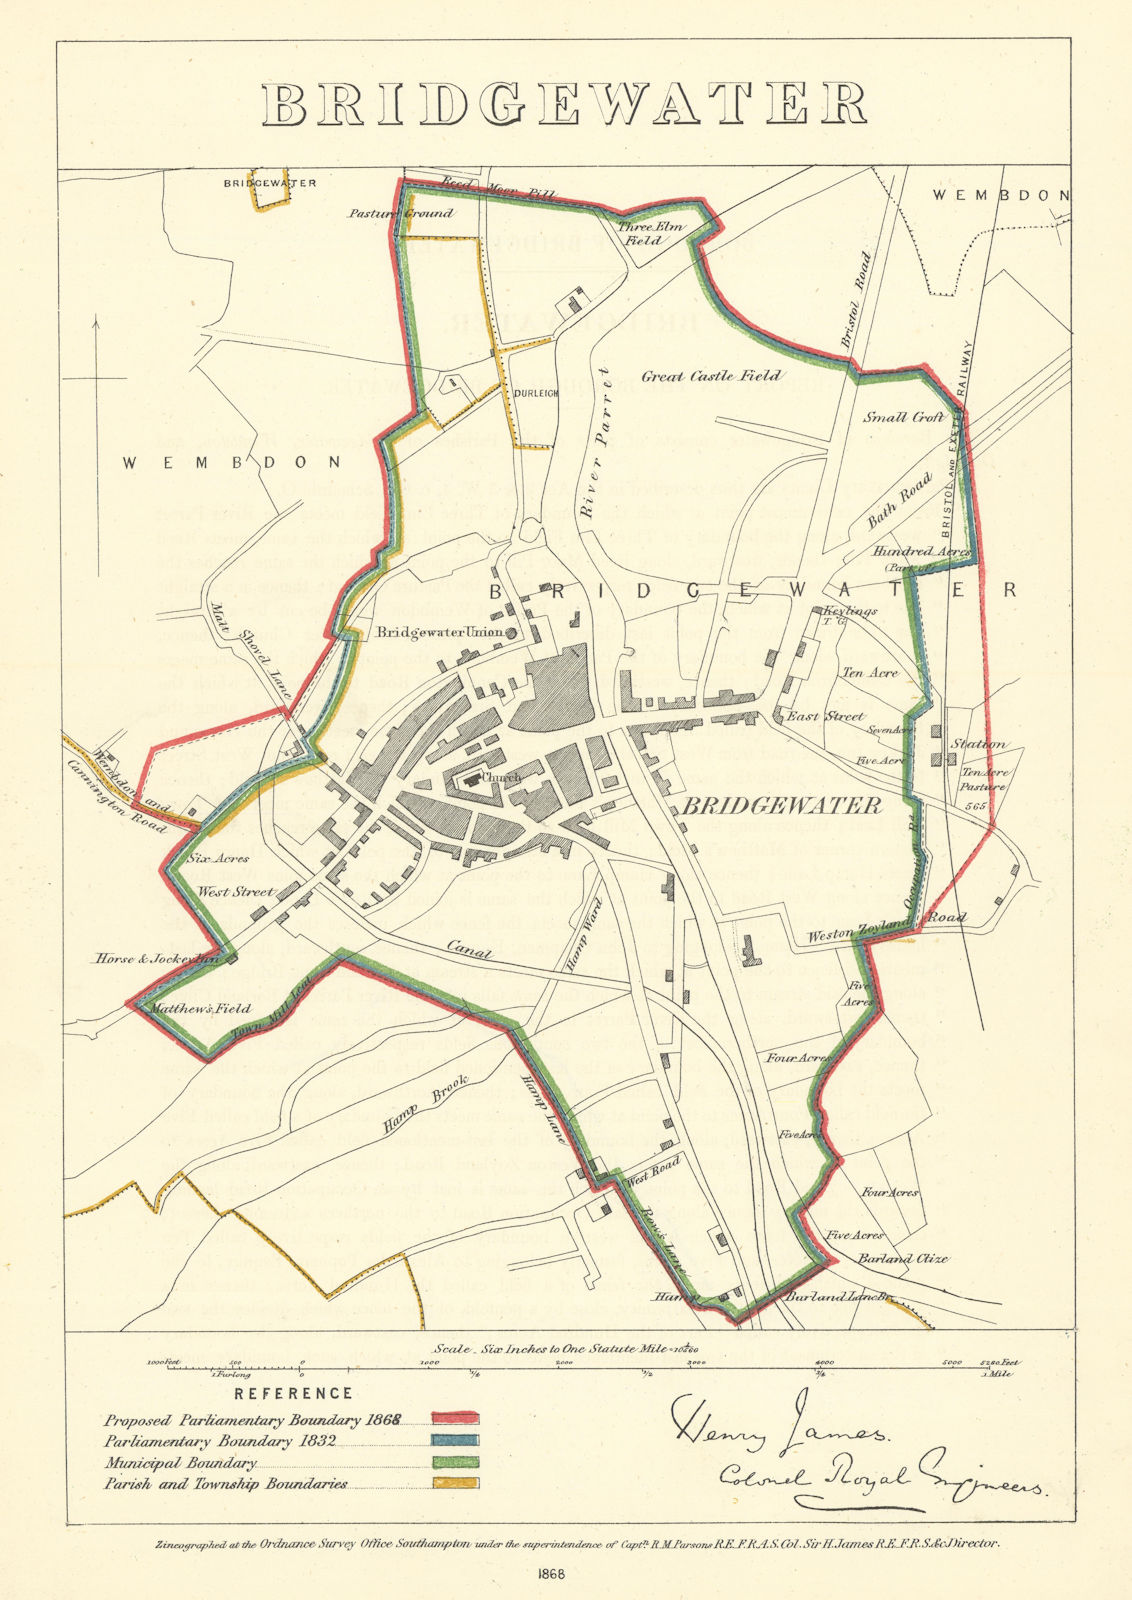 Bridgwater, Somerset. JAMES. Parliamentary Boundary Commission 1868 old map